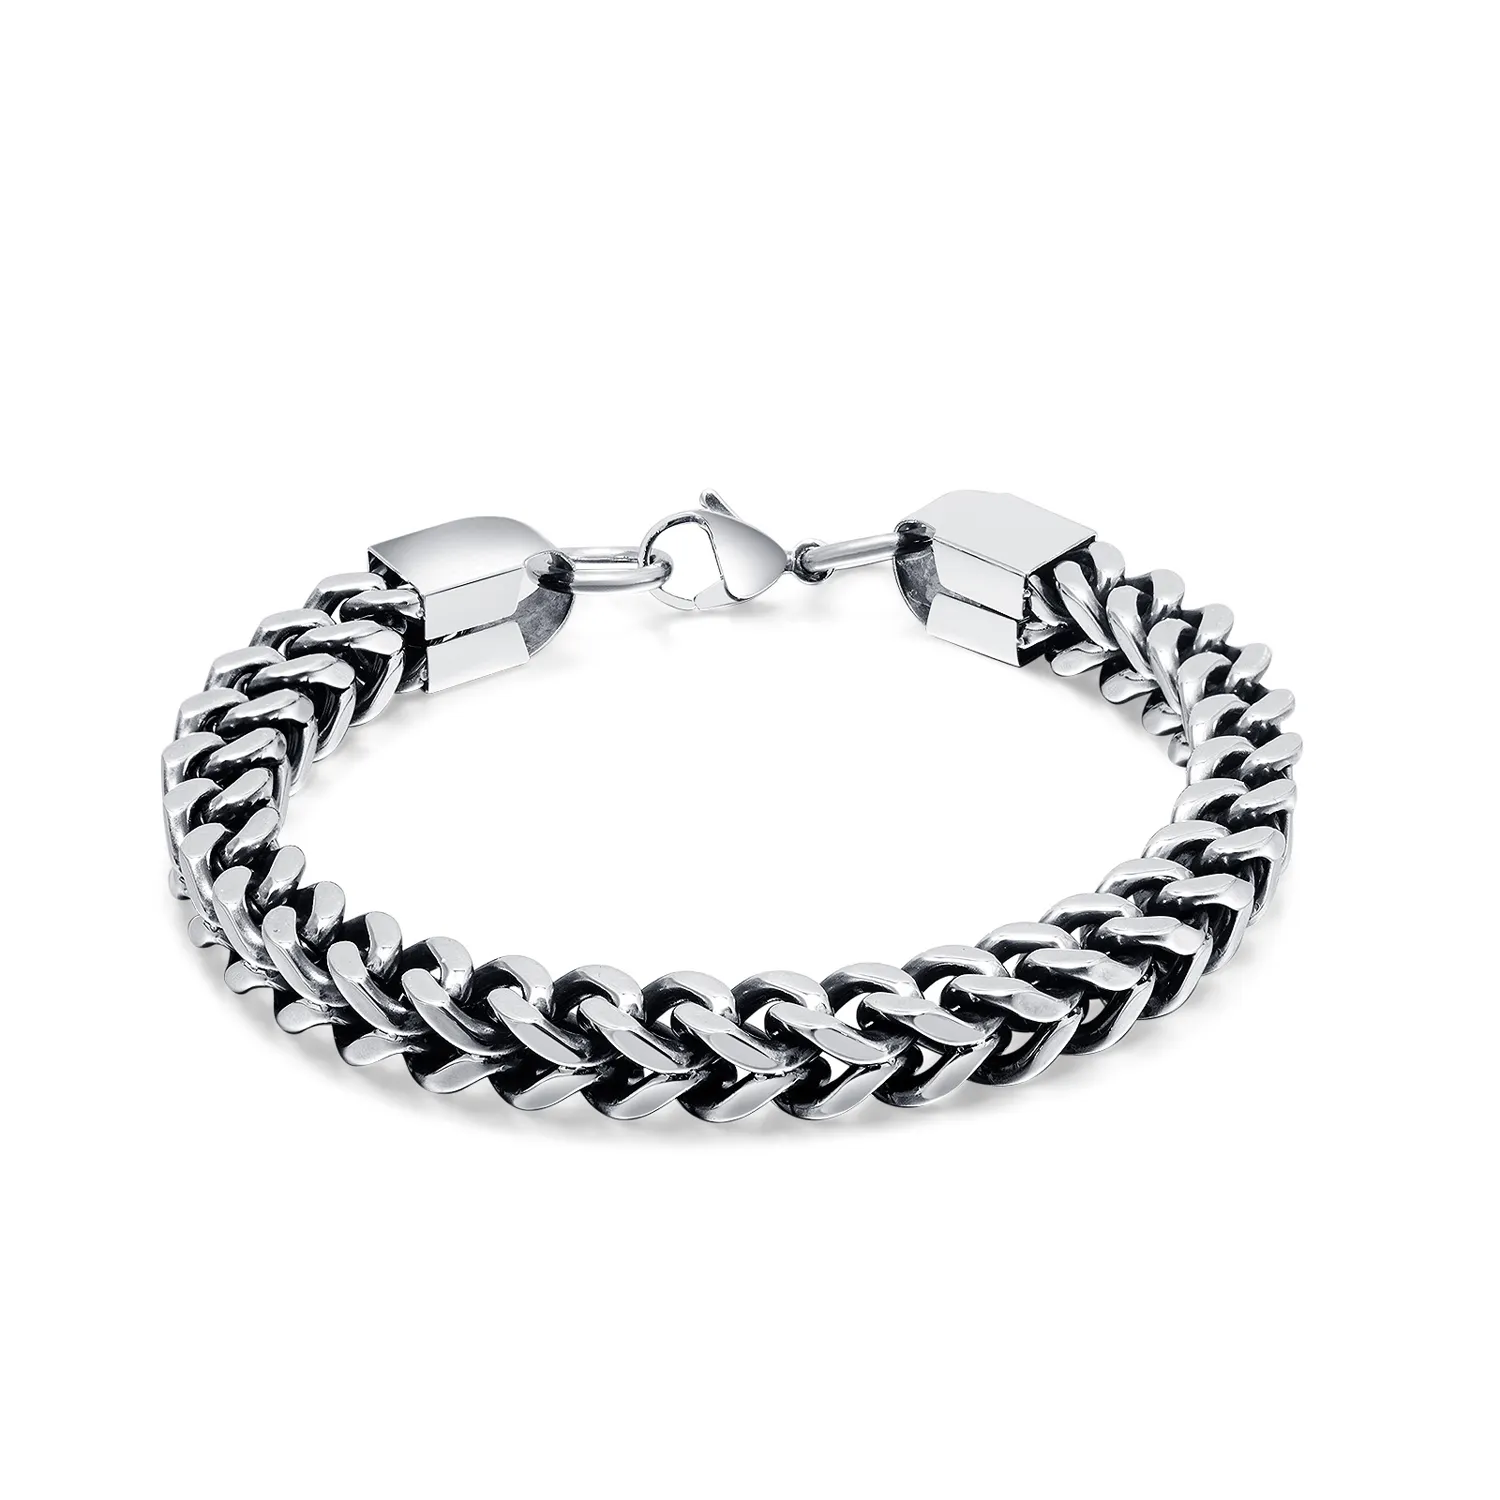 OYA Fashion Simple Multi-layer Jewelry Stainless Steel Silver Hip Hop Design for Men Chain Bracelet